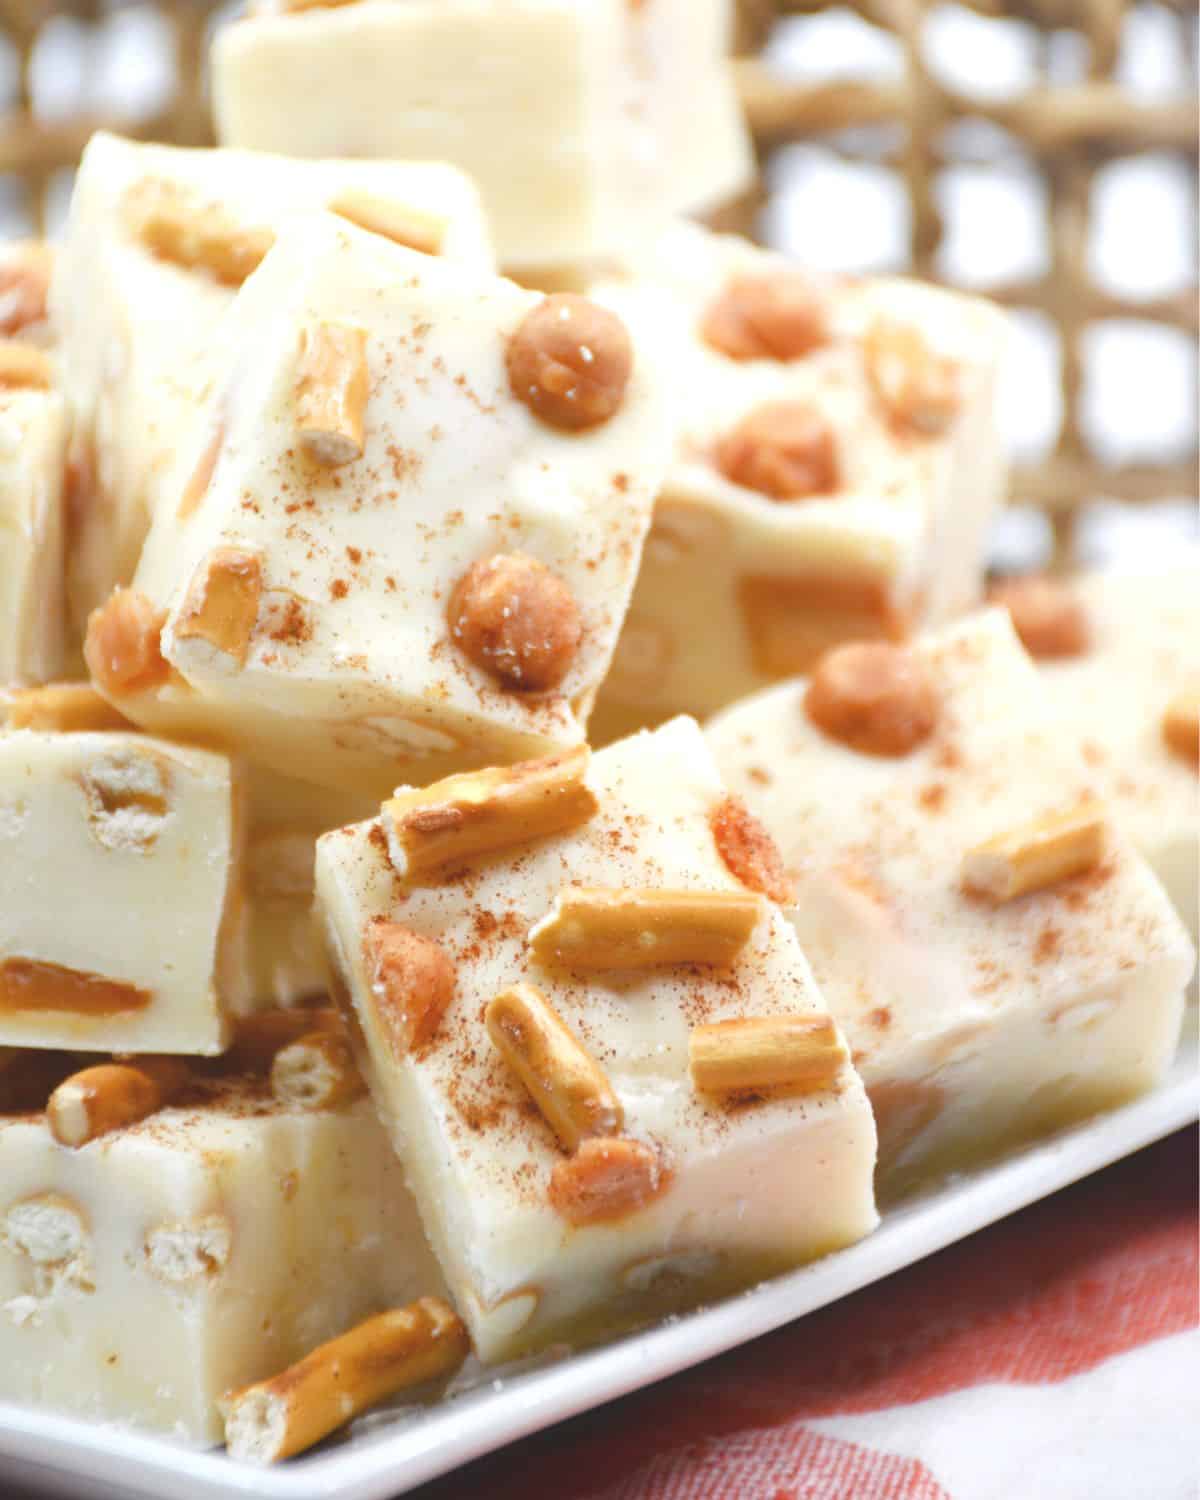 White chocolate fudge with caramel bits and pretzel pieces on a plate.